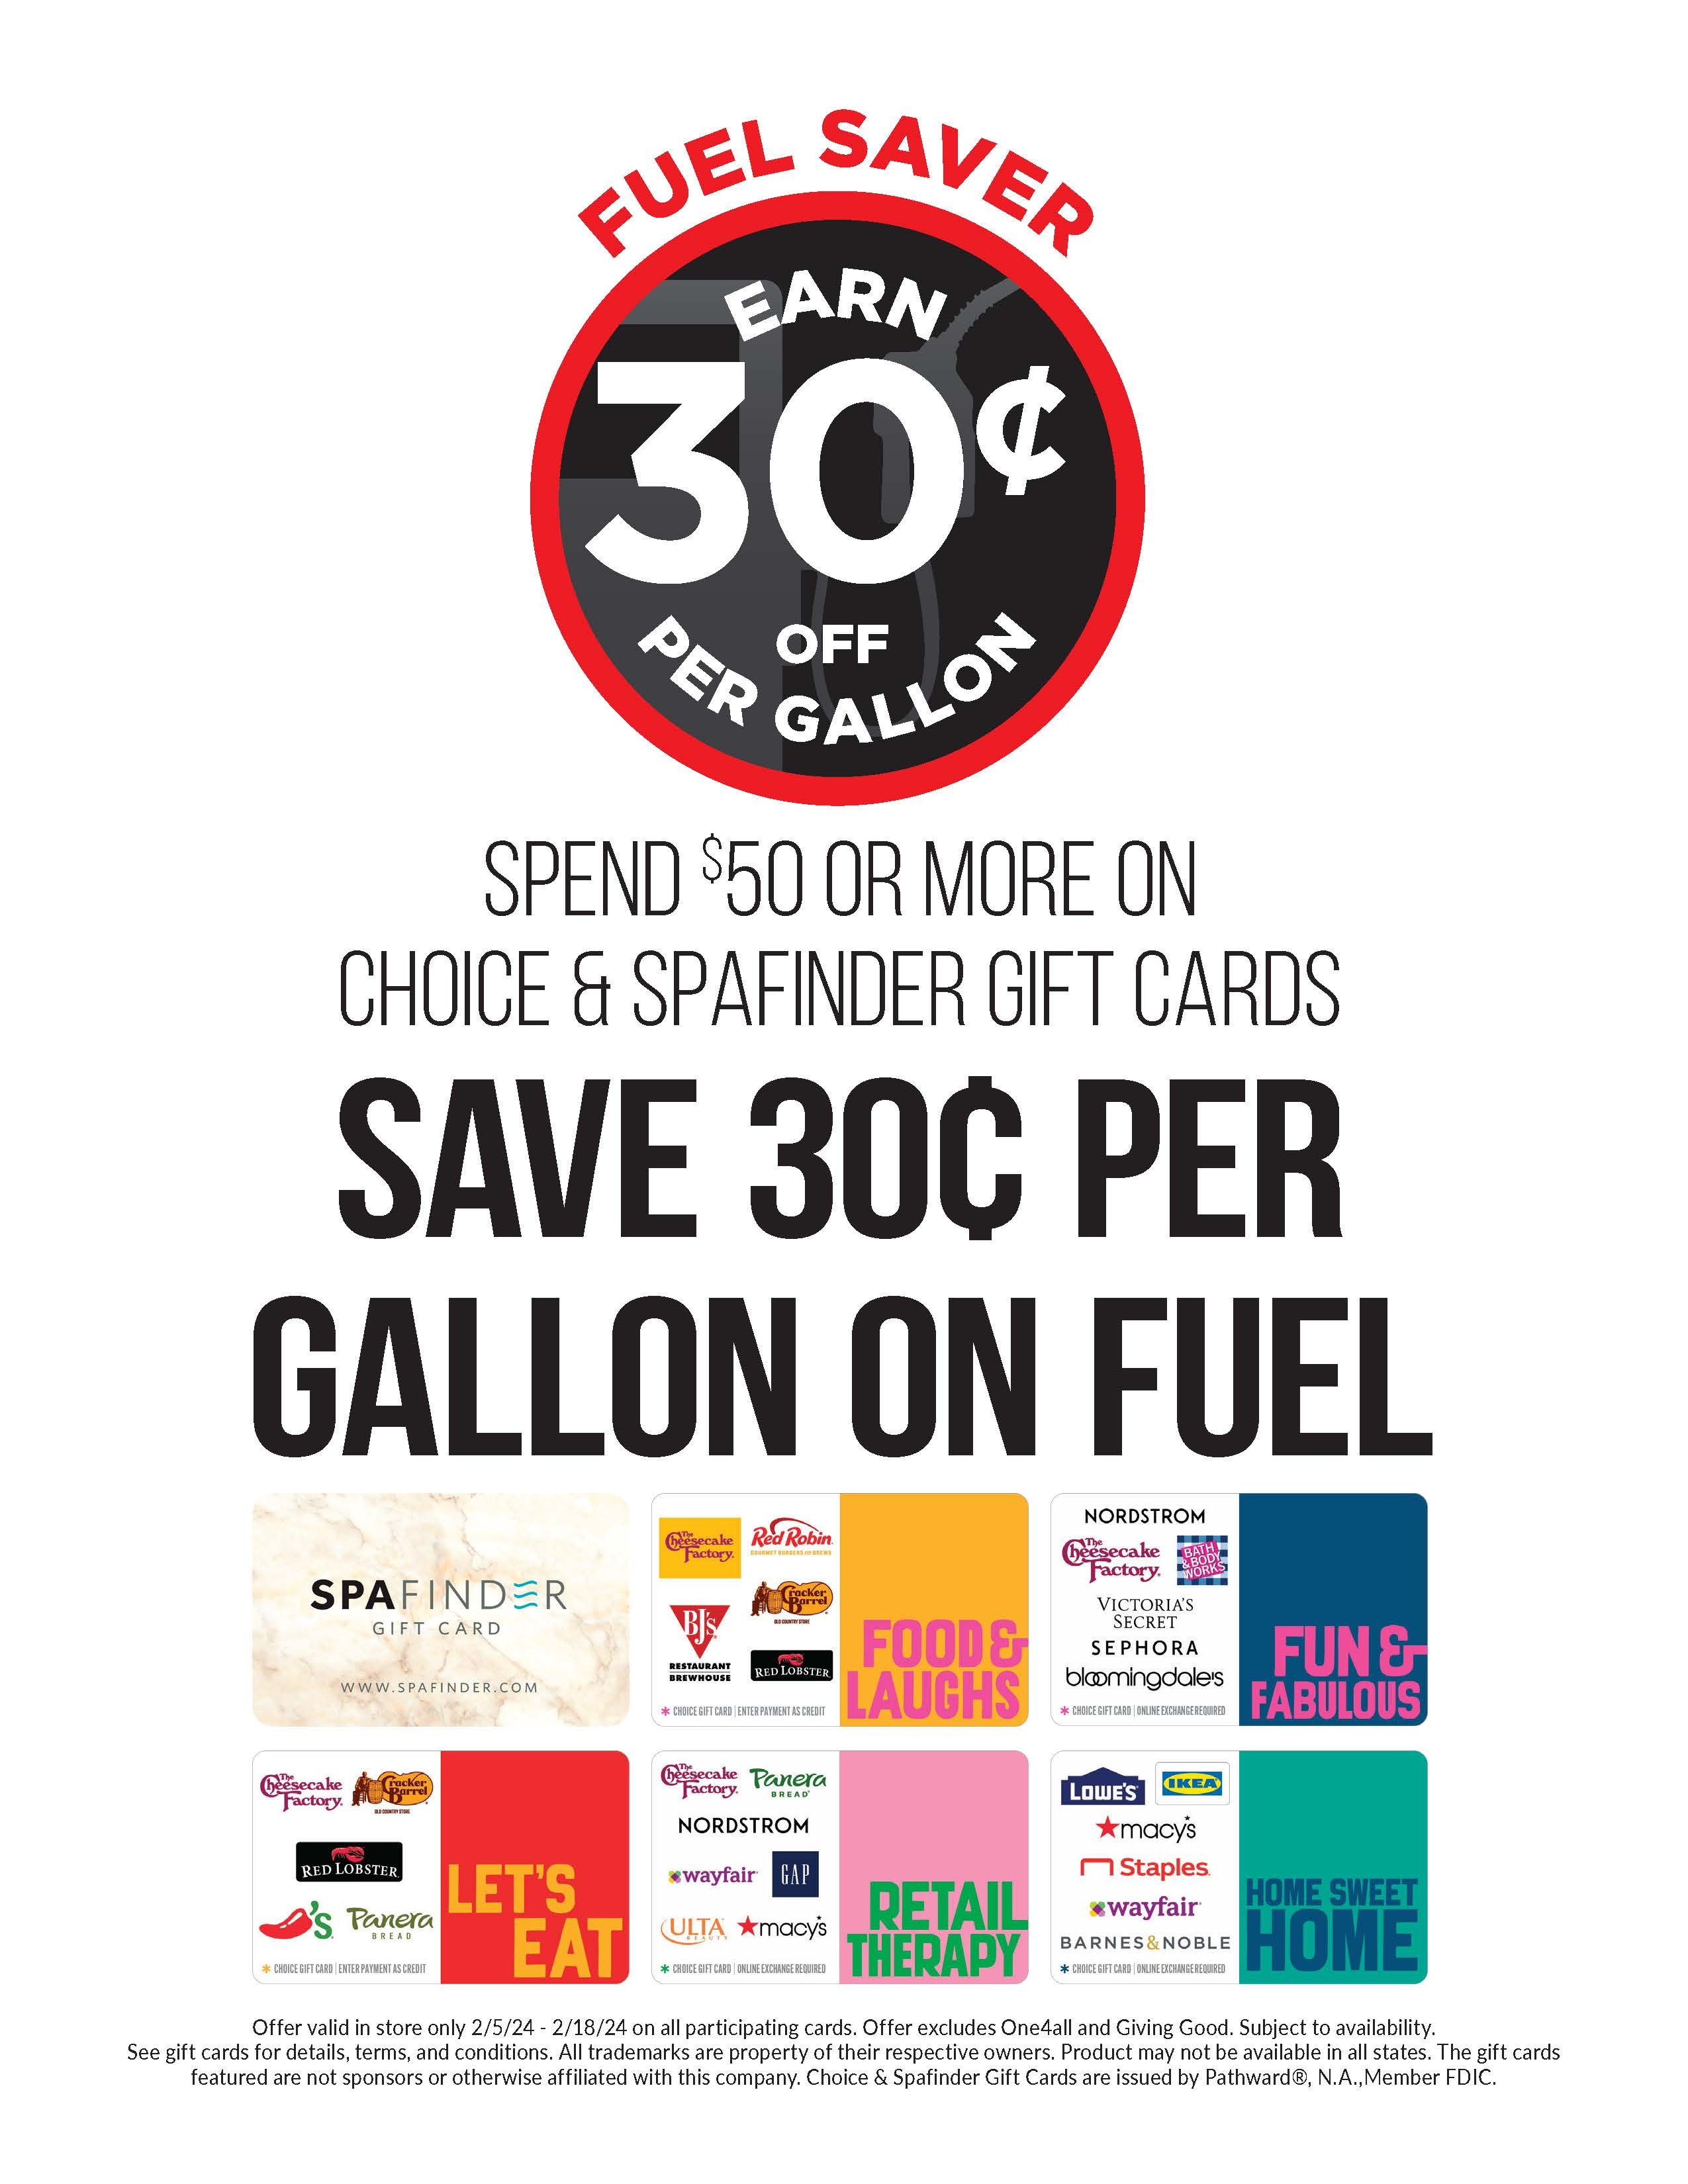 February T Card Fuel Saver Promotion Company Hy Vee Your Employee Owned Grocery Store